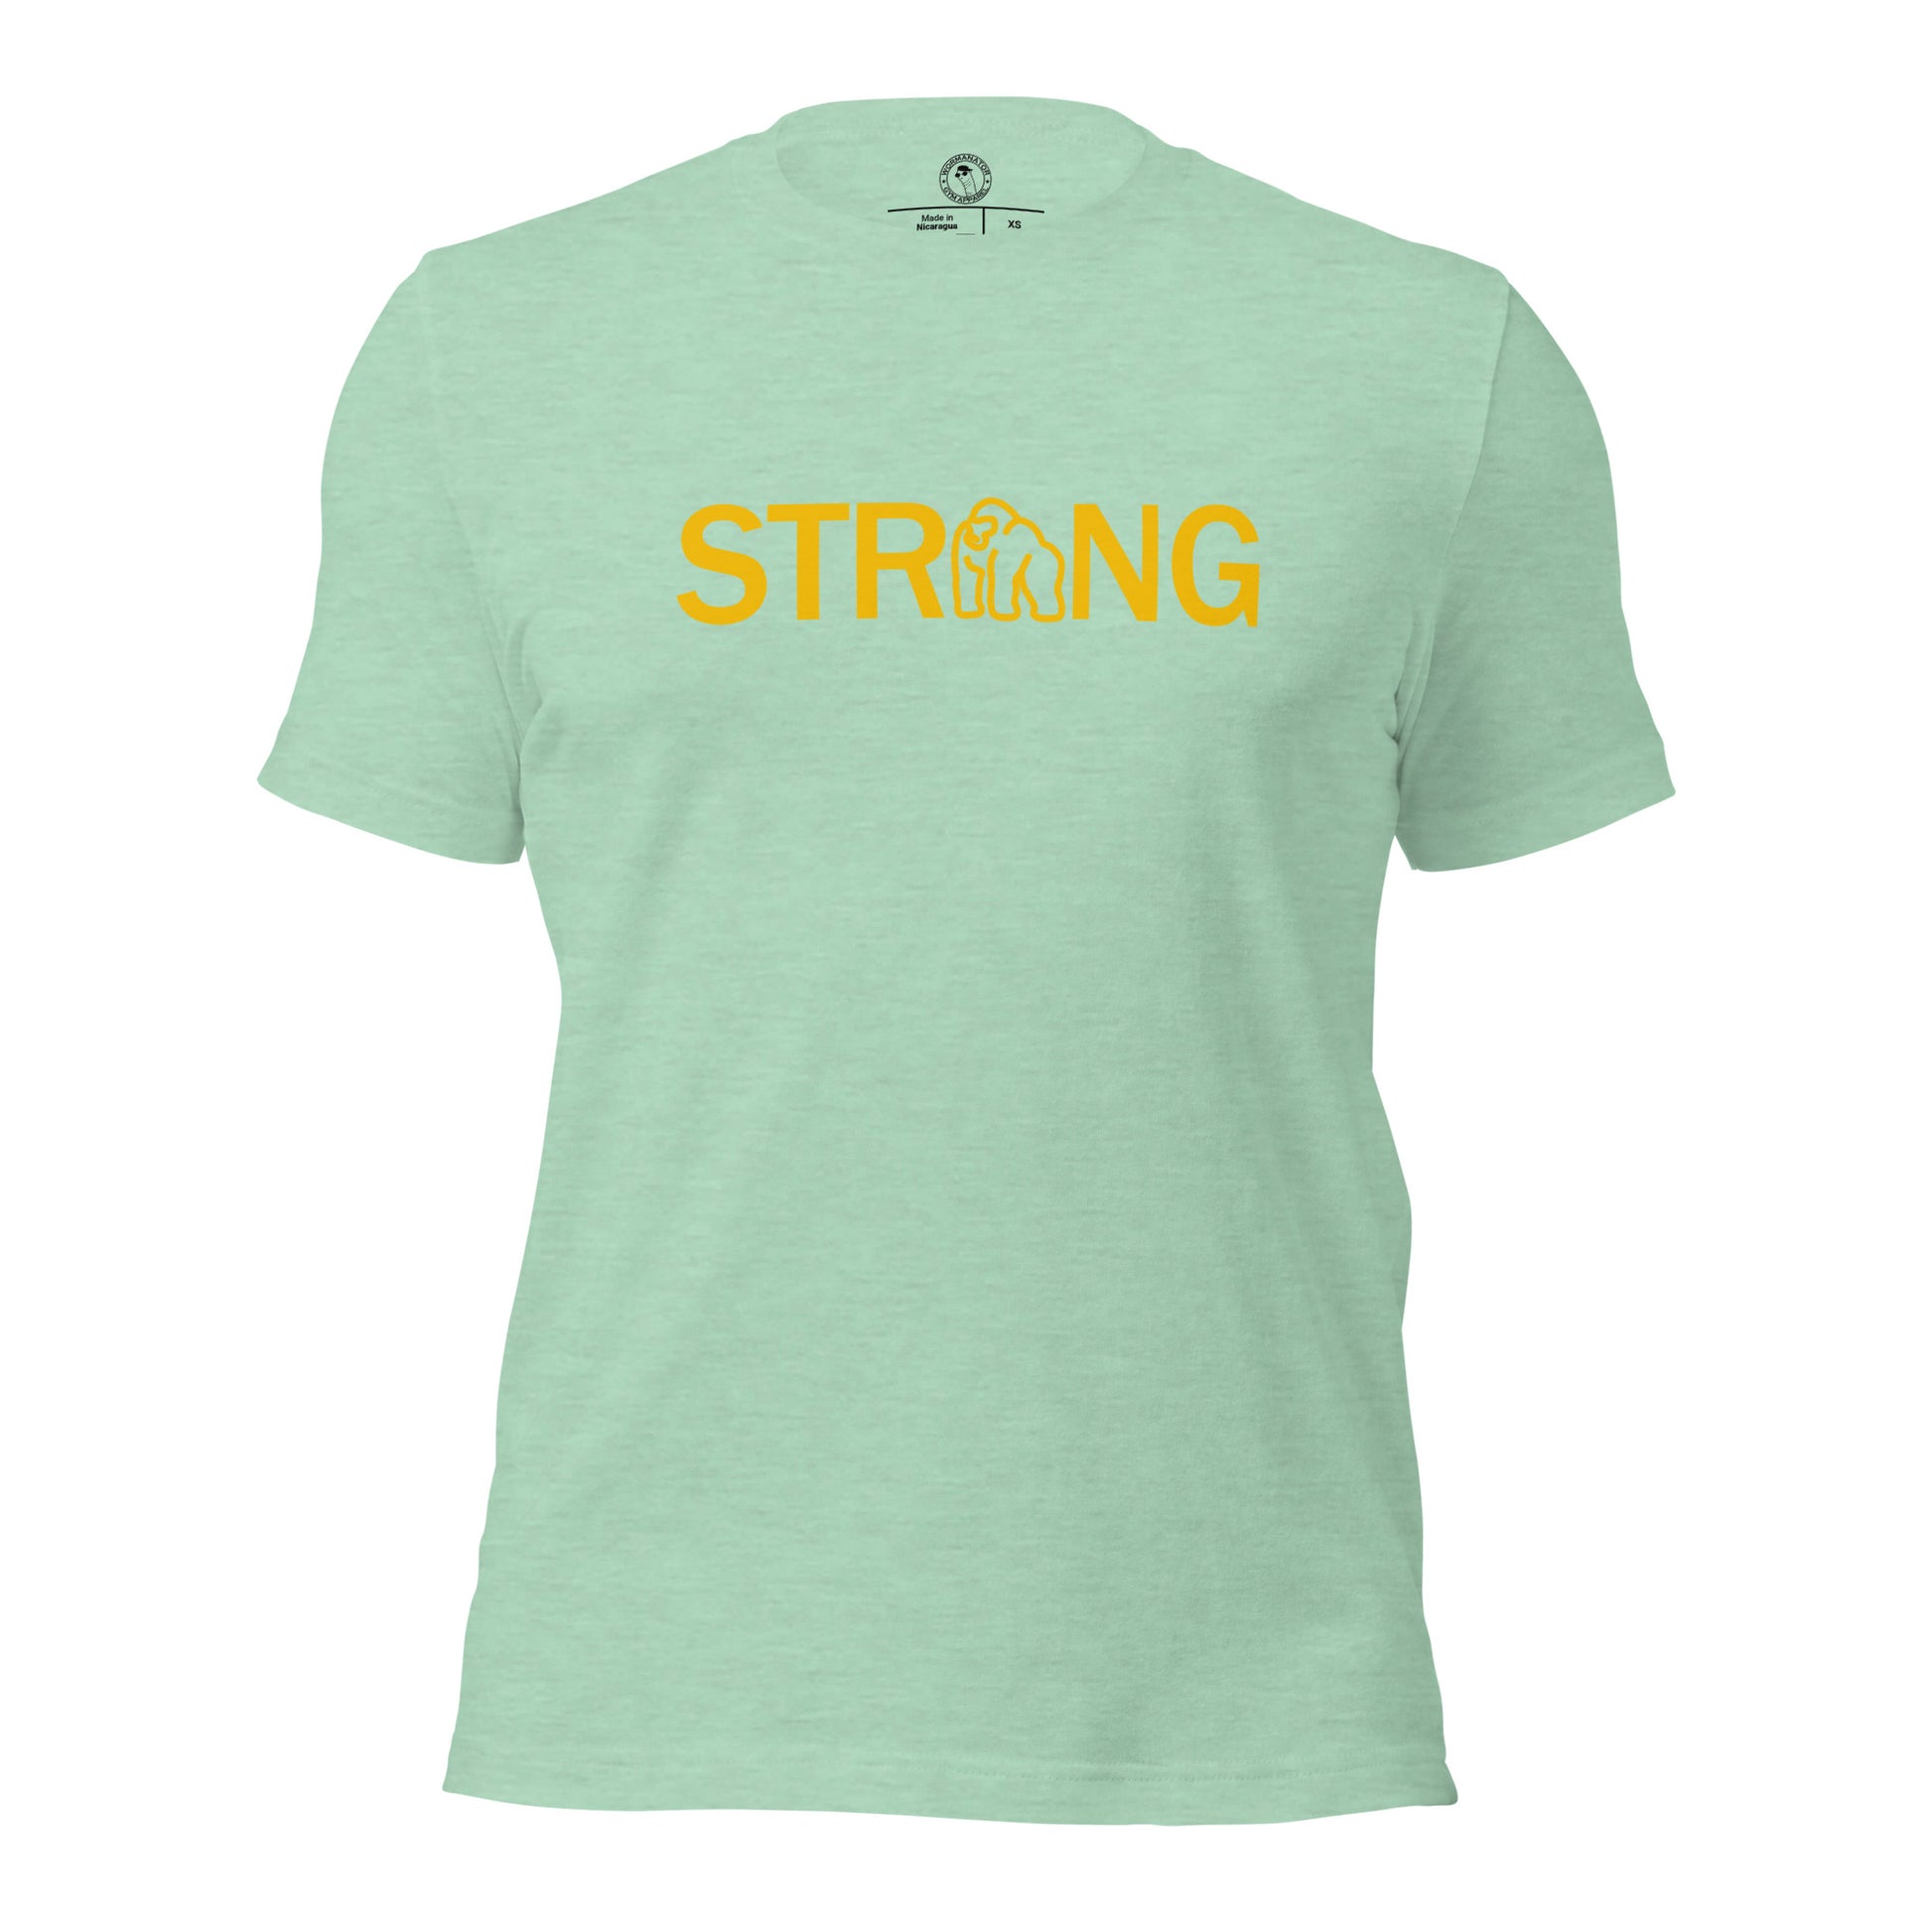 Ape Strong Shirt in Heather Prism Mint